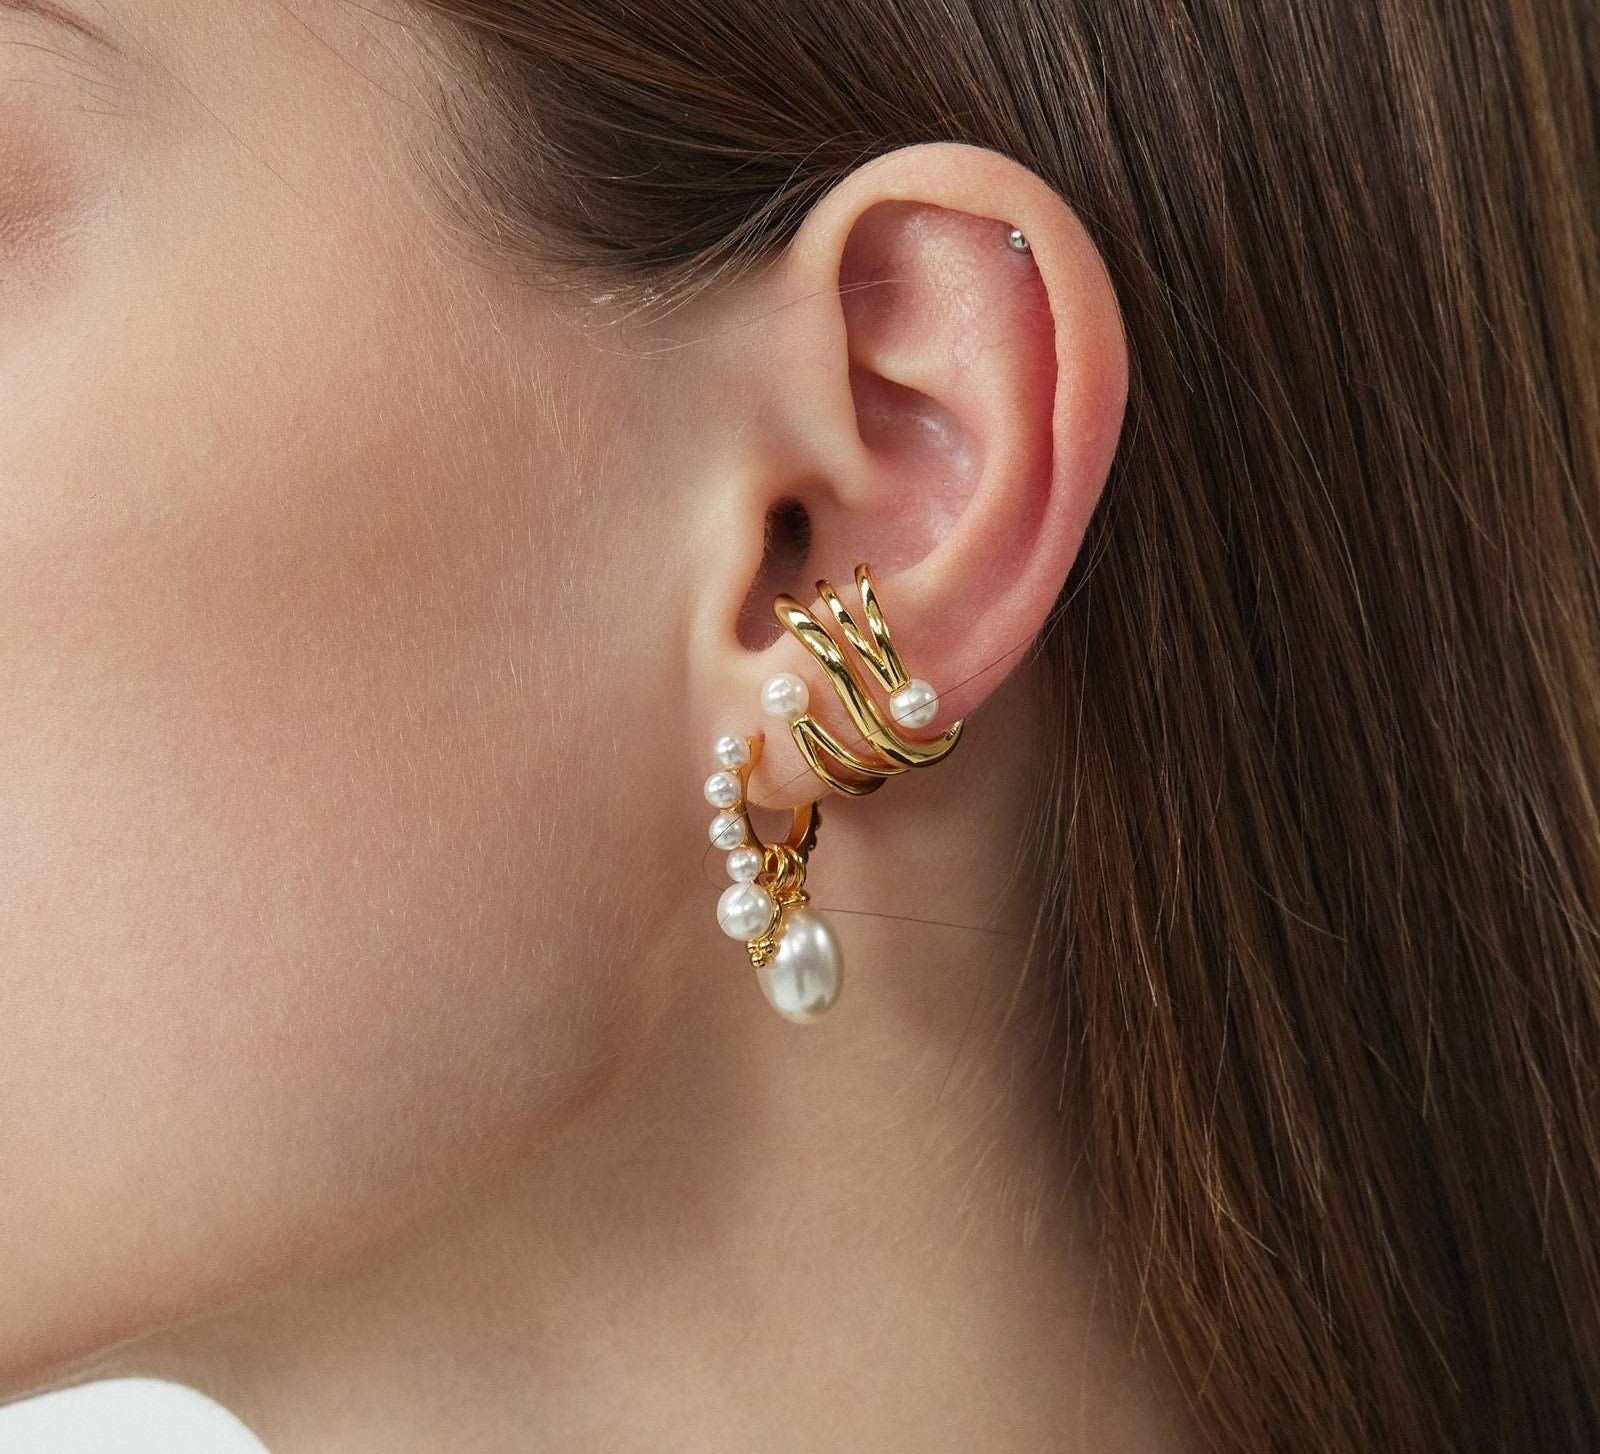 Gold Ear Cuff adorned with a pearl, a statement accessory that exudes sophistication and glamour